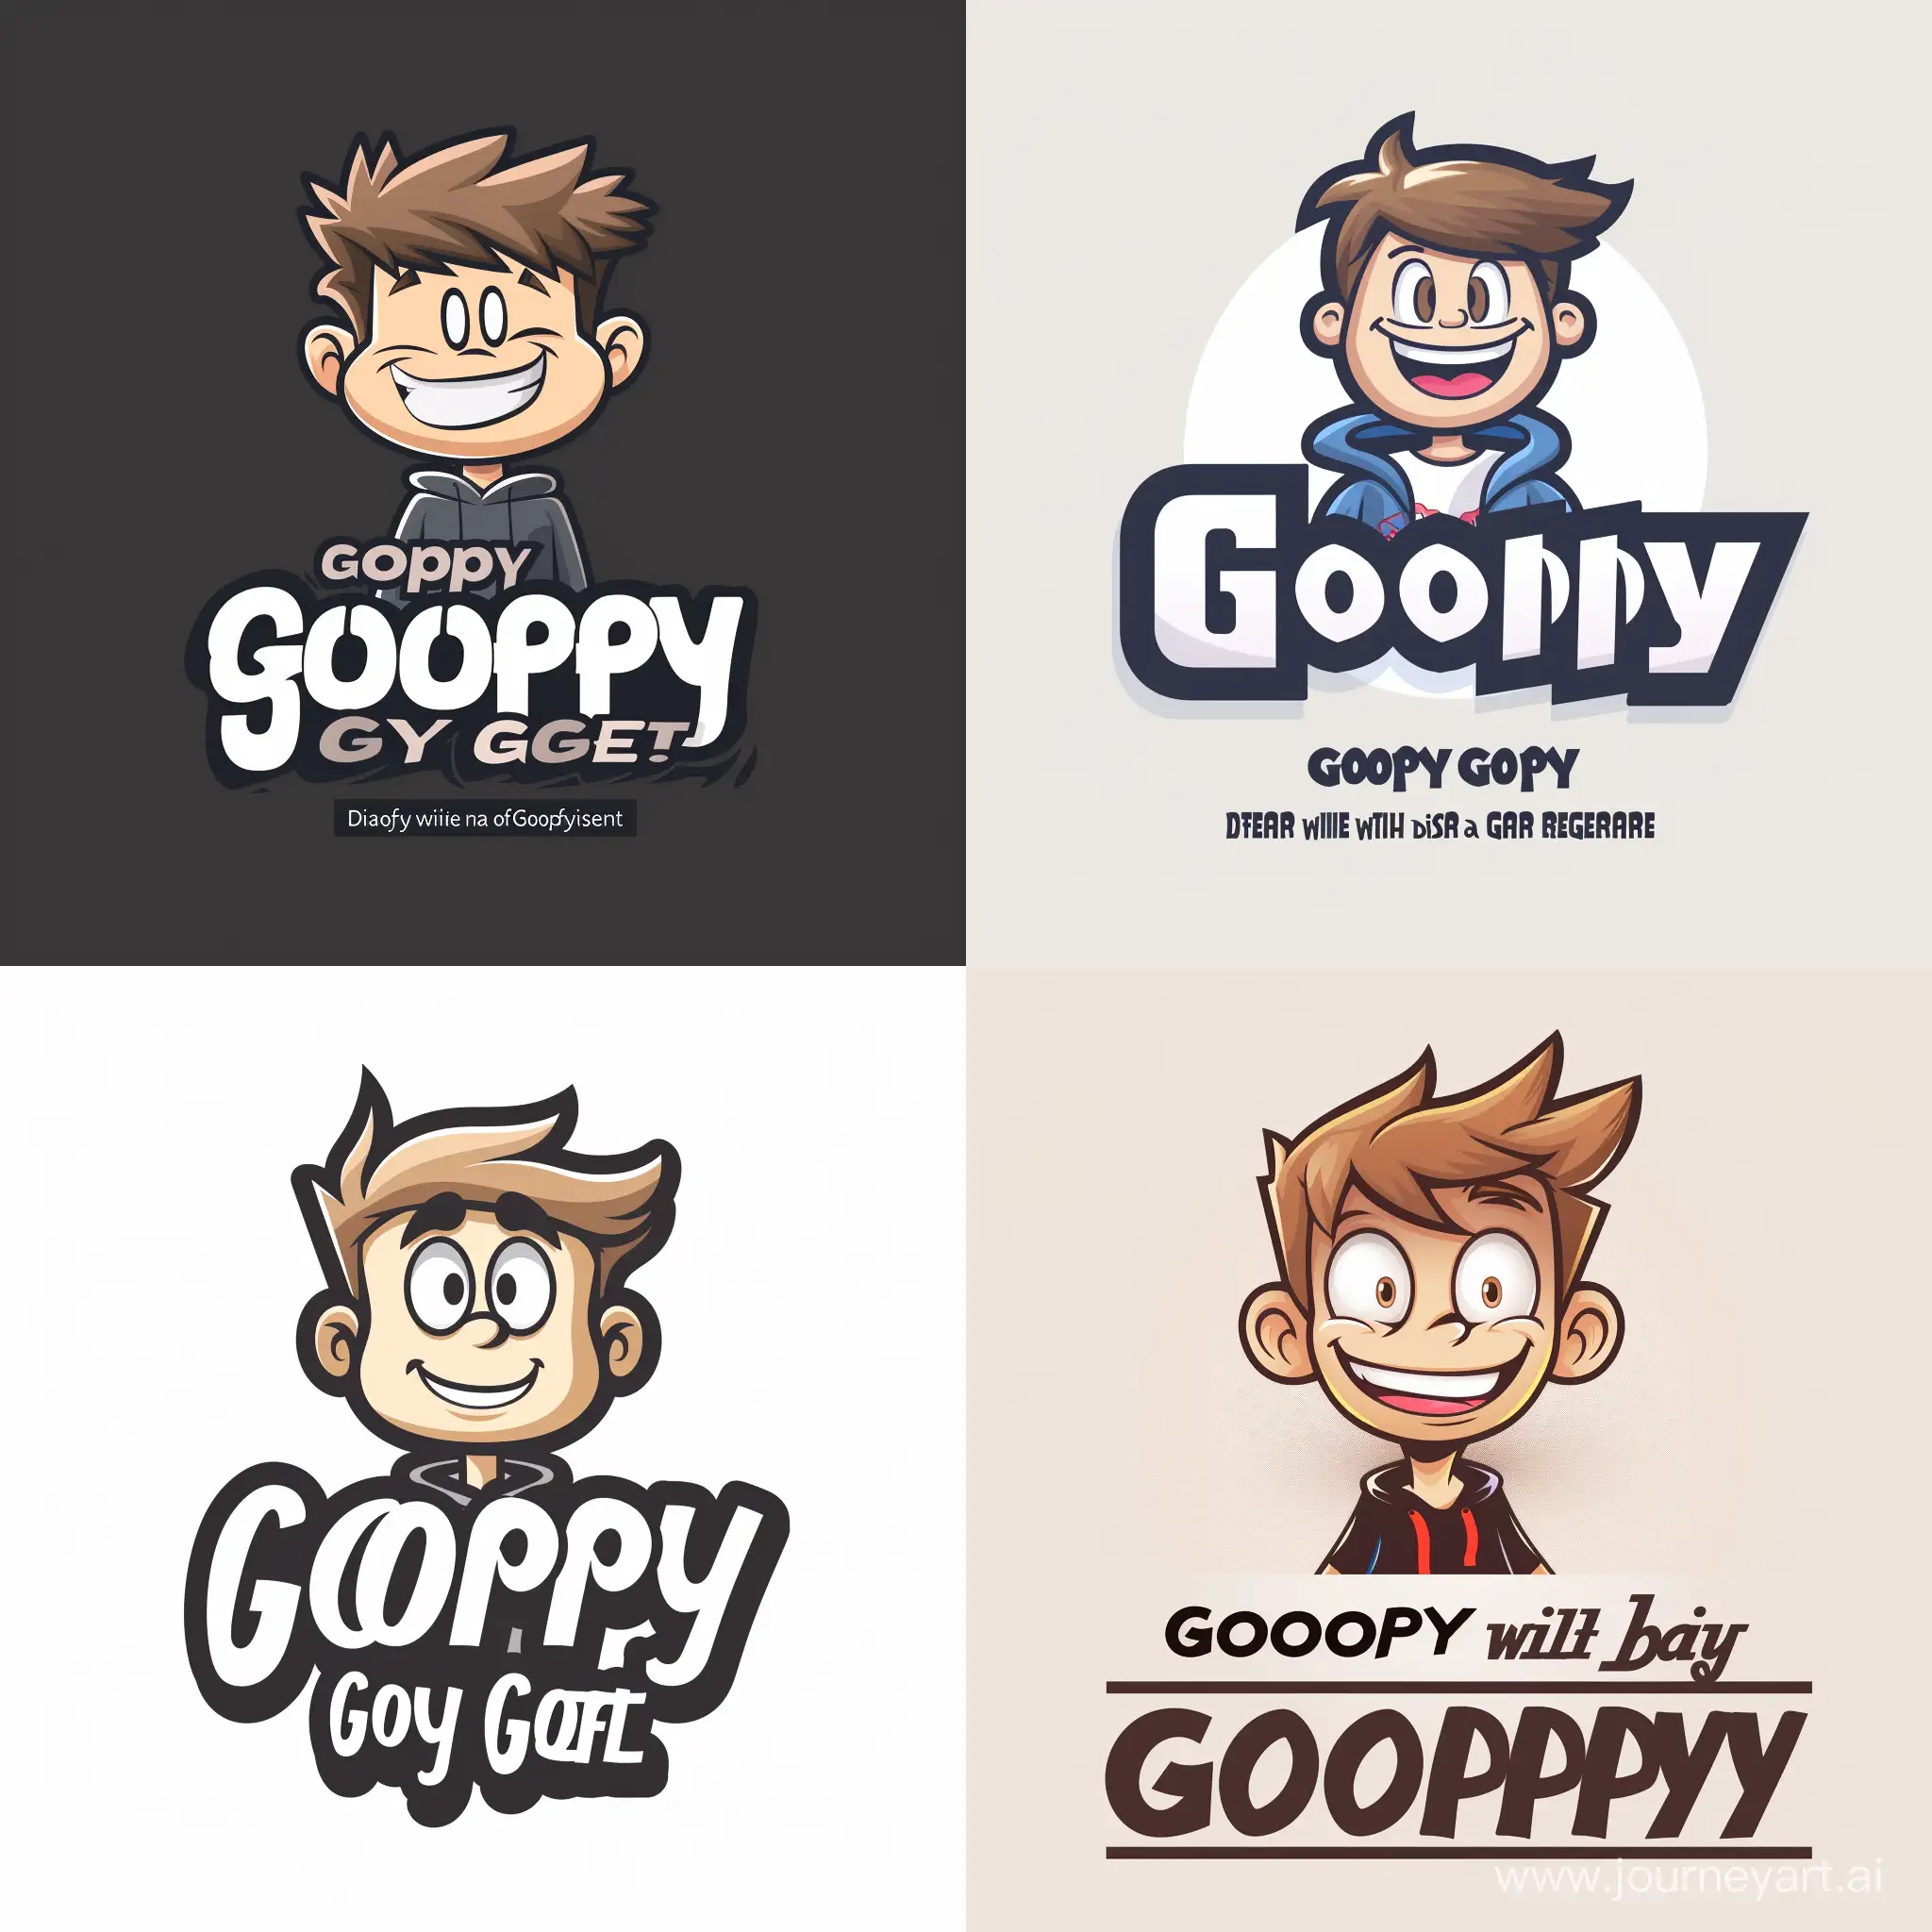 Imagine a sleek and stylish font for the words "Goofy Guy Gear," with the word ""Goofy" having a slightly playful and curvy font to reflect the fun aspect of your brand. Below the text, incorporate a small cartoon-like image of a smiling, stylish guy wearing some of your clothing items, such as a t-shirt or hoodie with a goofy expression. You can stylize the guy to be fashionable yet approachable, with a playful vibe that matches your brand's personality. make a logo for my clothing business according to the information given and also add my business slogan "Dress with a Dash of Goofiness" in it